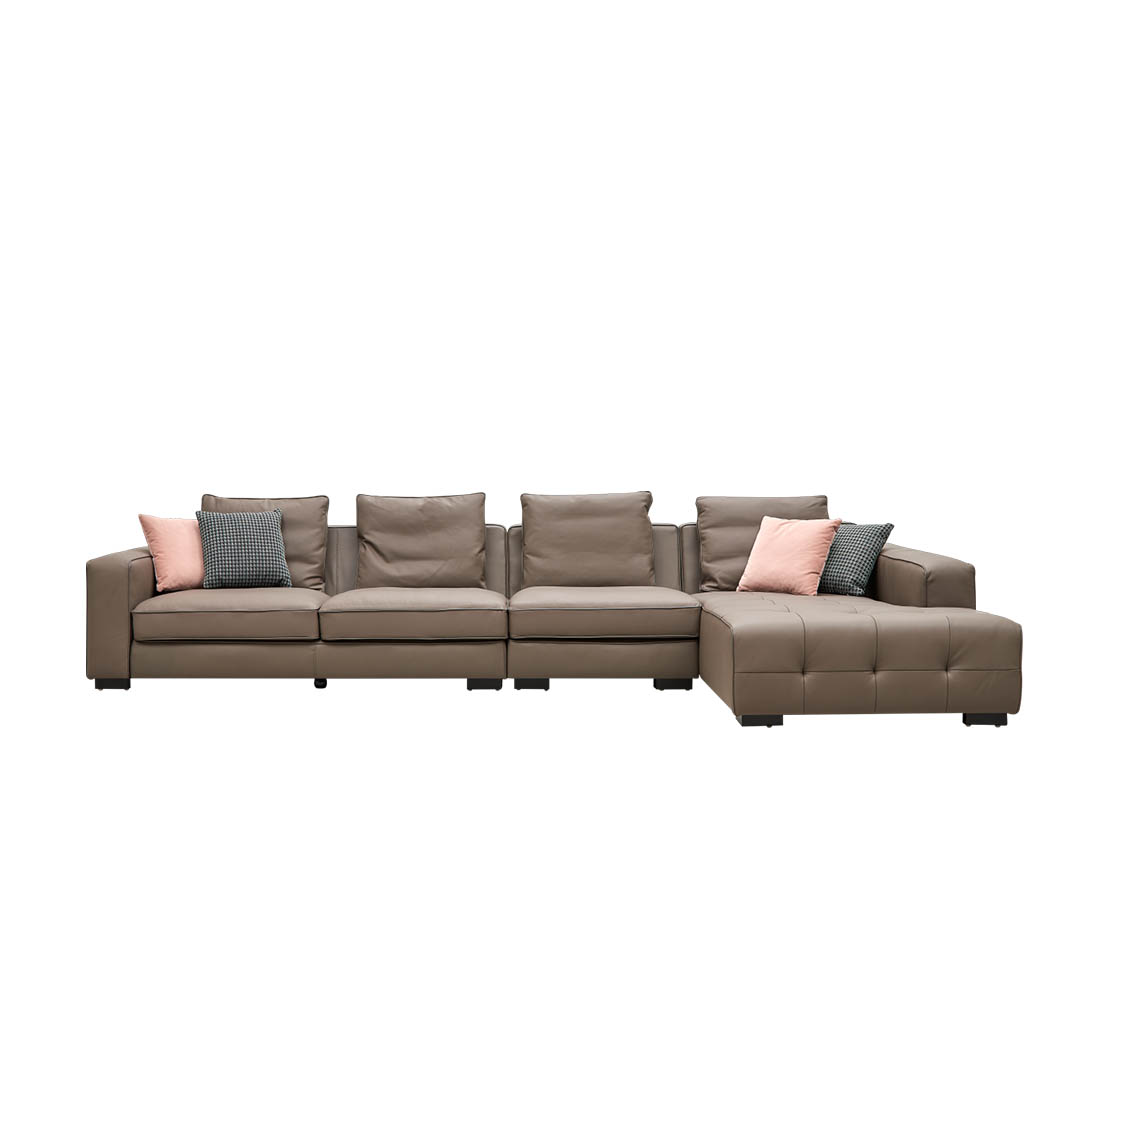 Sofa L Sectional Couch Modular Shaped Sofa